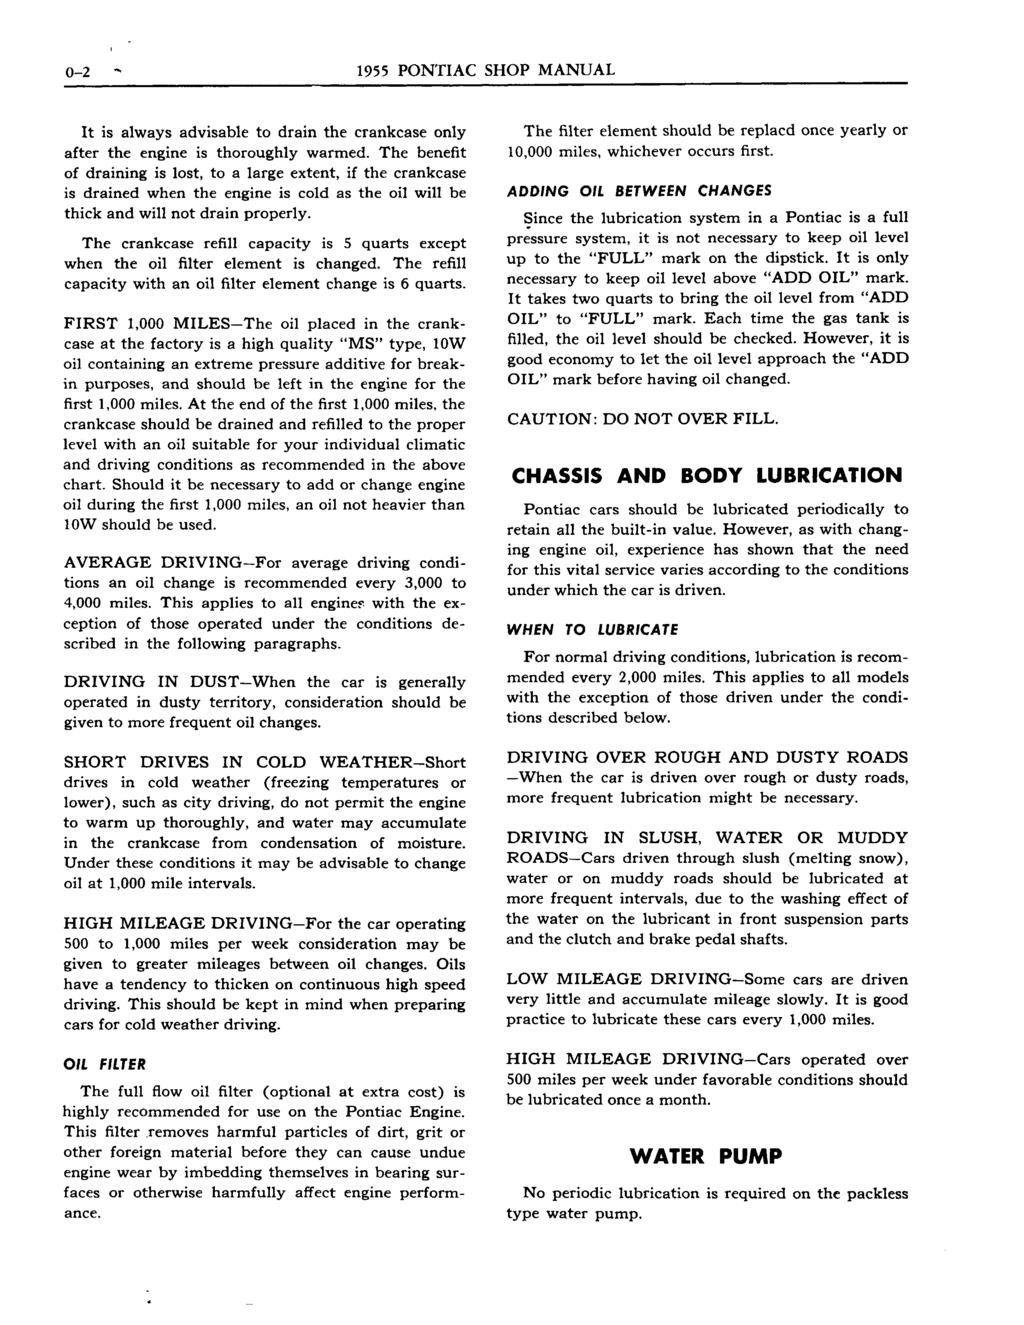 0-2 1955 PONTIAC SHOP MANUAL It is always advisable to drain the crankcase only after the engine is thoroughly warmed.